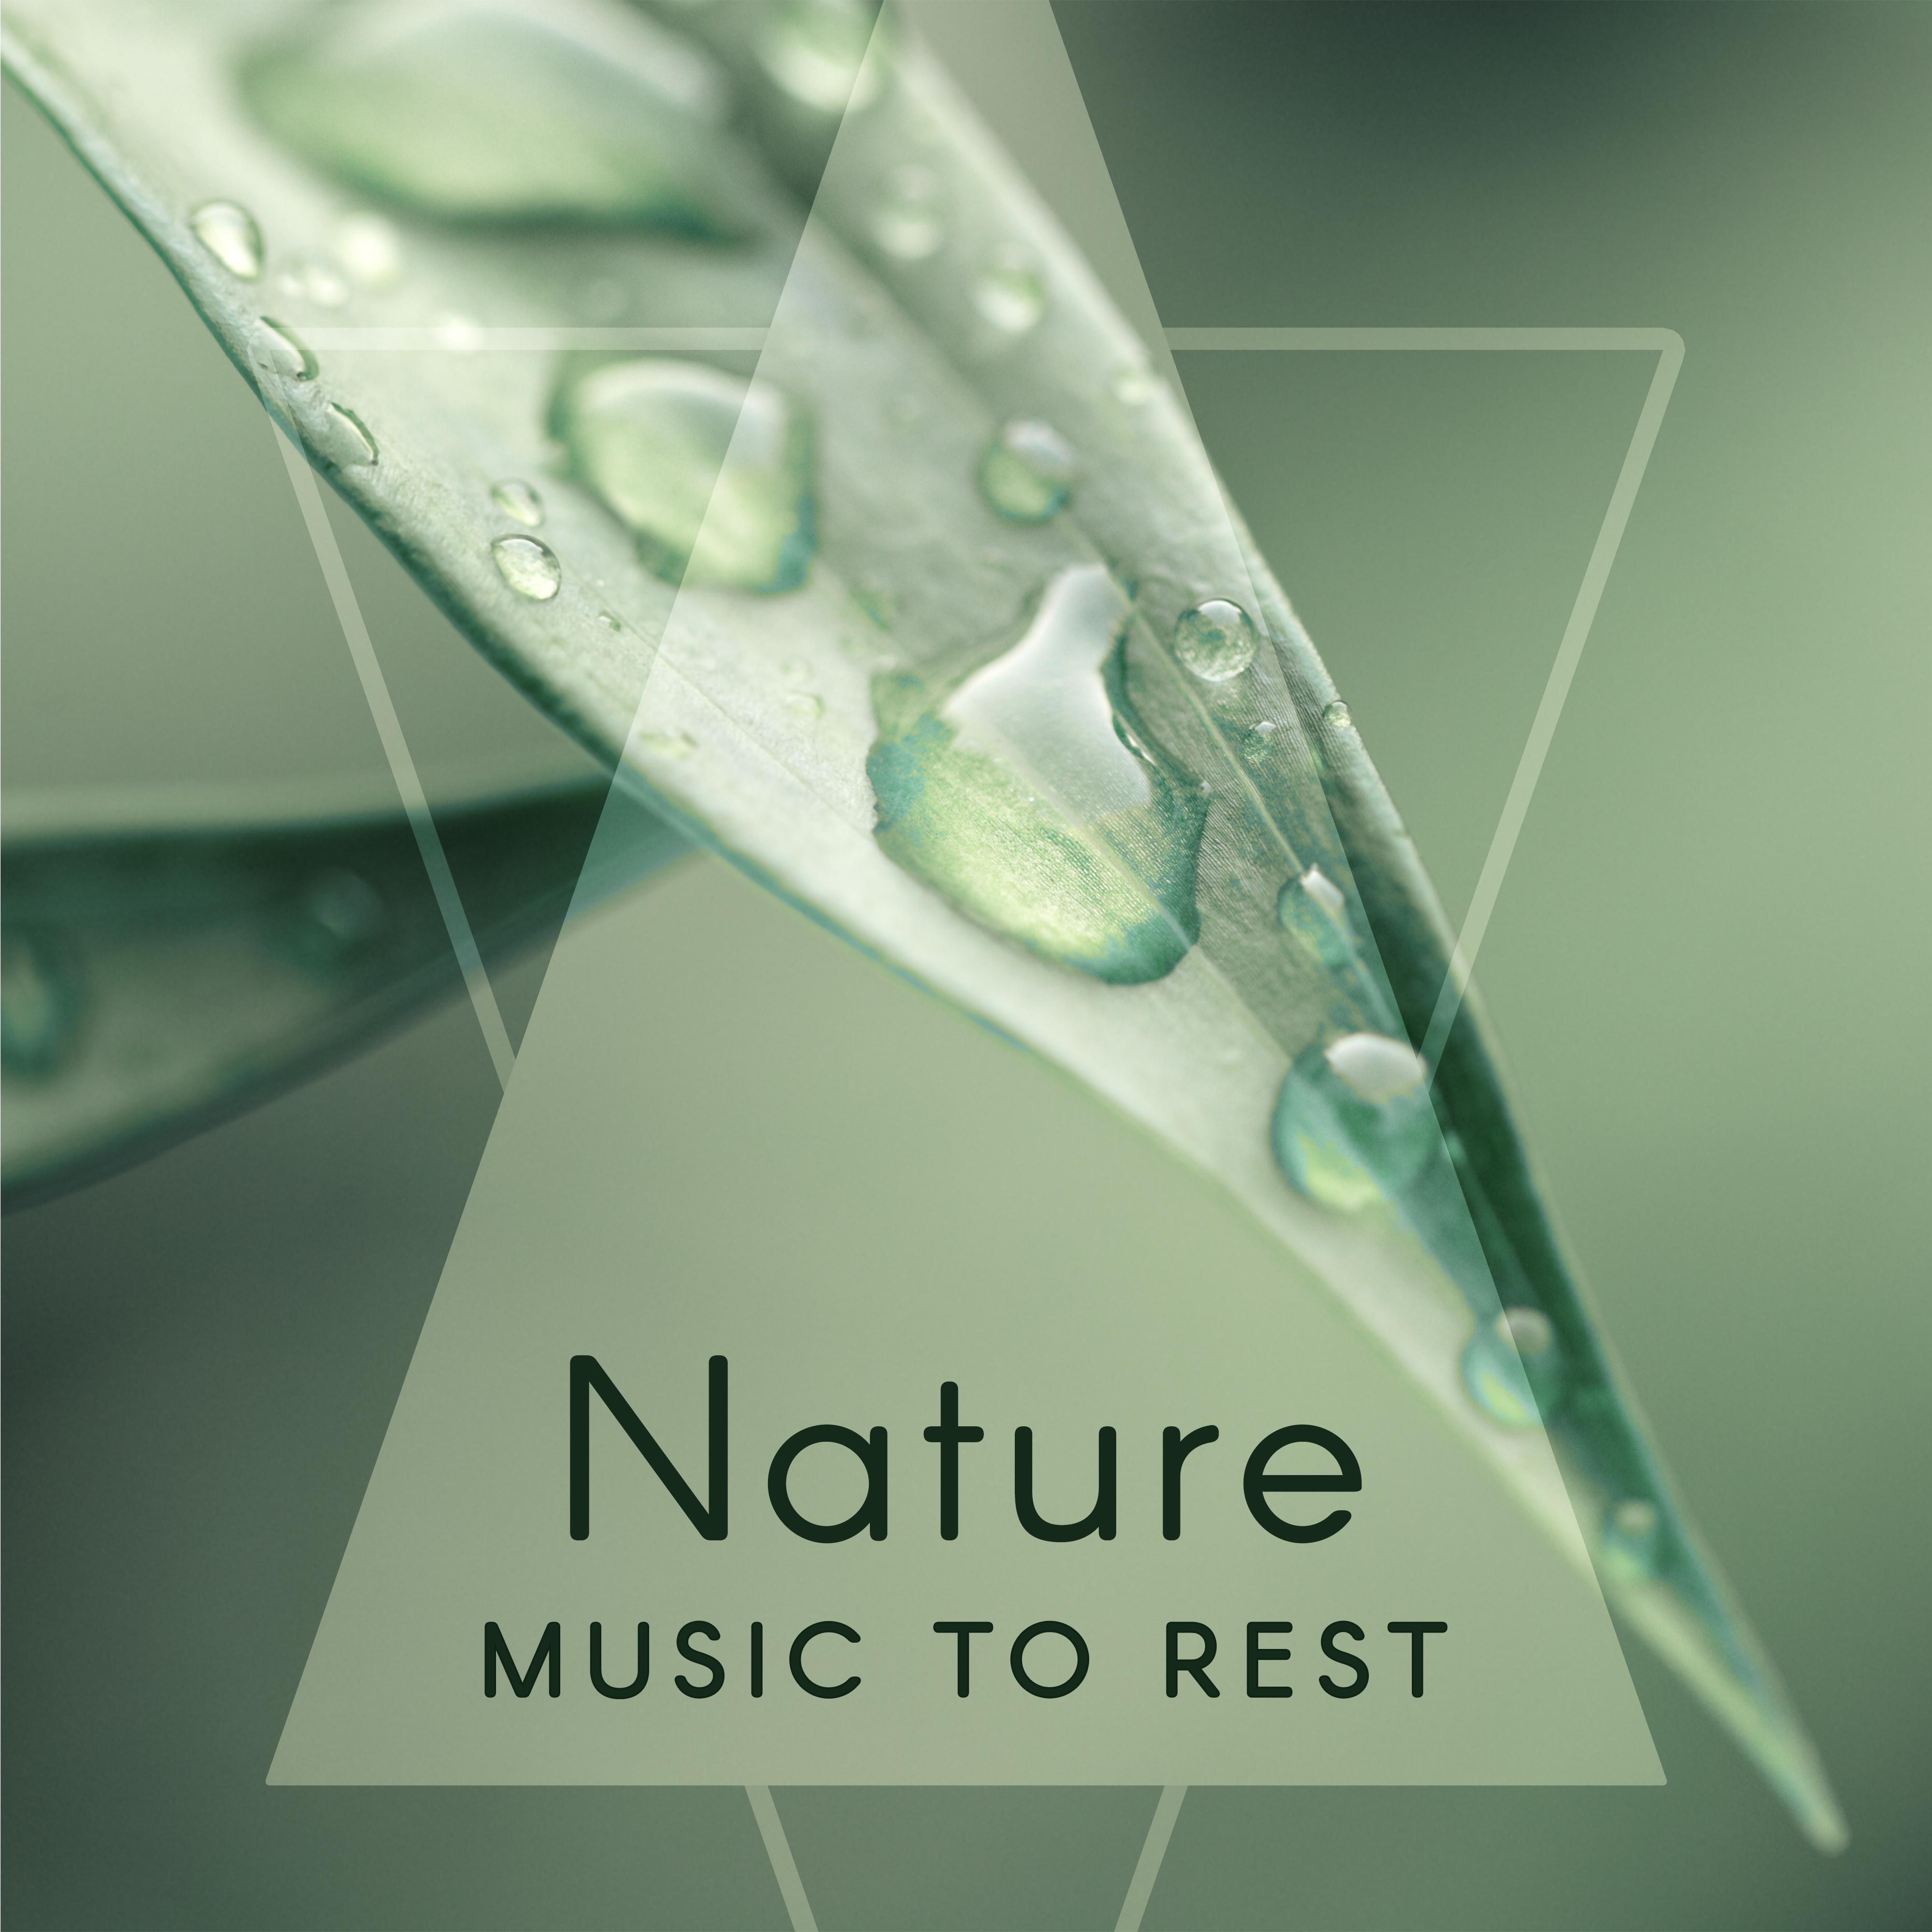 Nature Music to Rest – Soothing Waves, Nature Relaxation, New Age Calm Music, Sounds to Rest & Relax